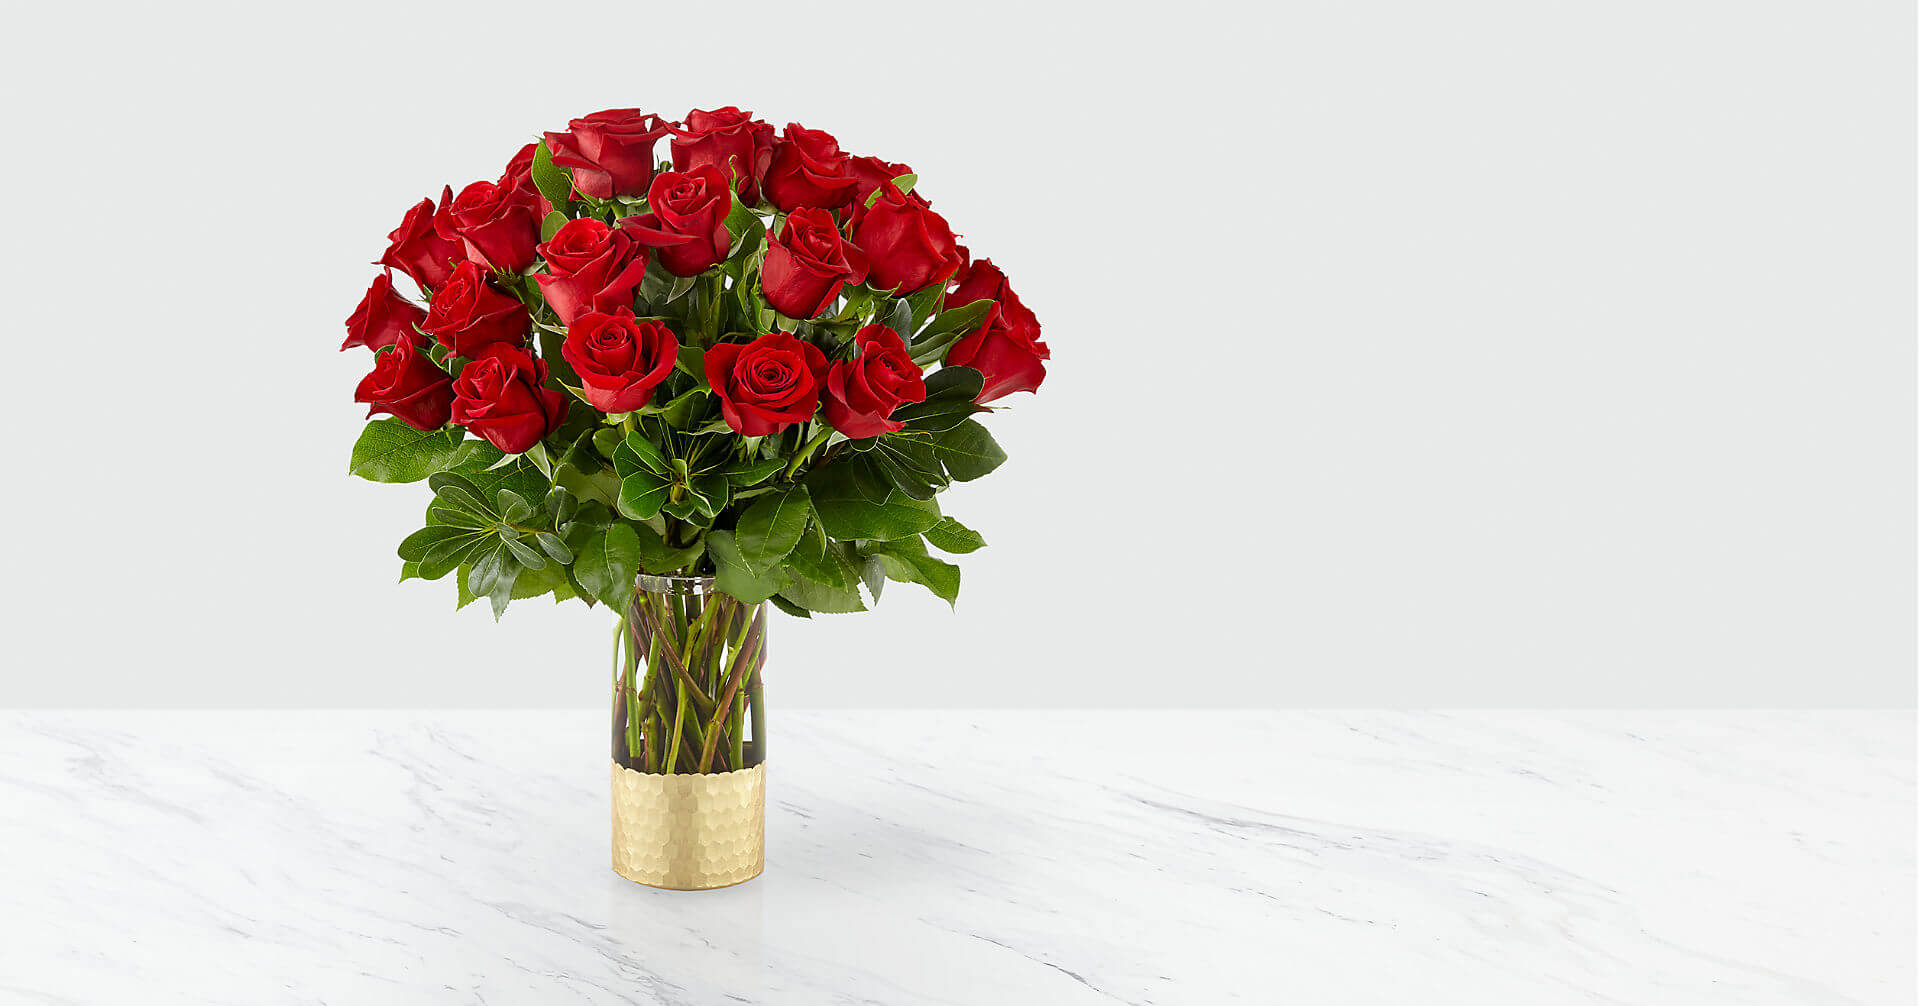 Red rose - Valentine’s Day flowers